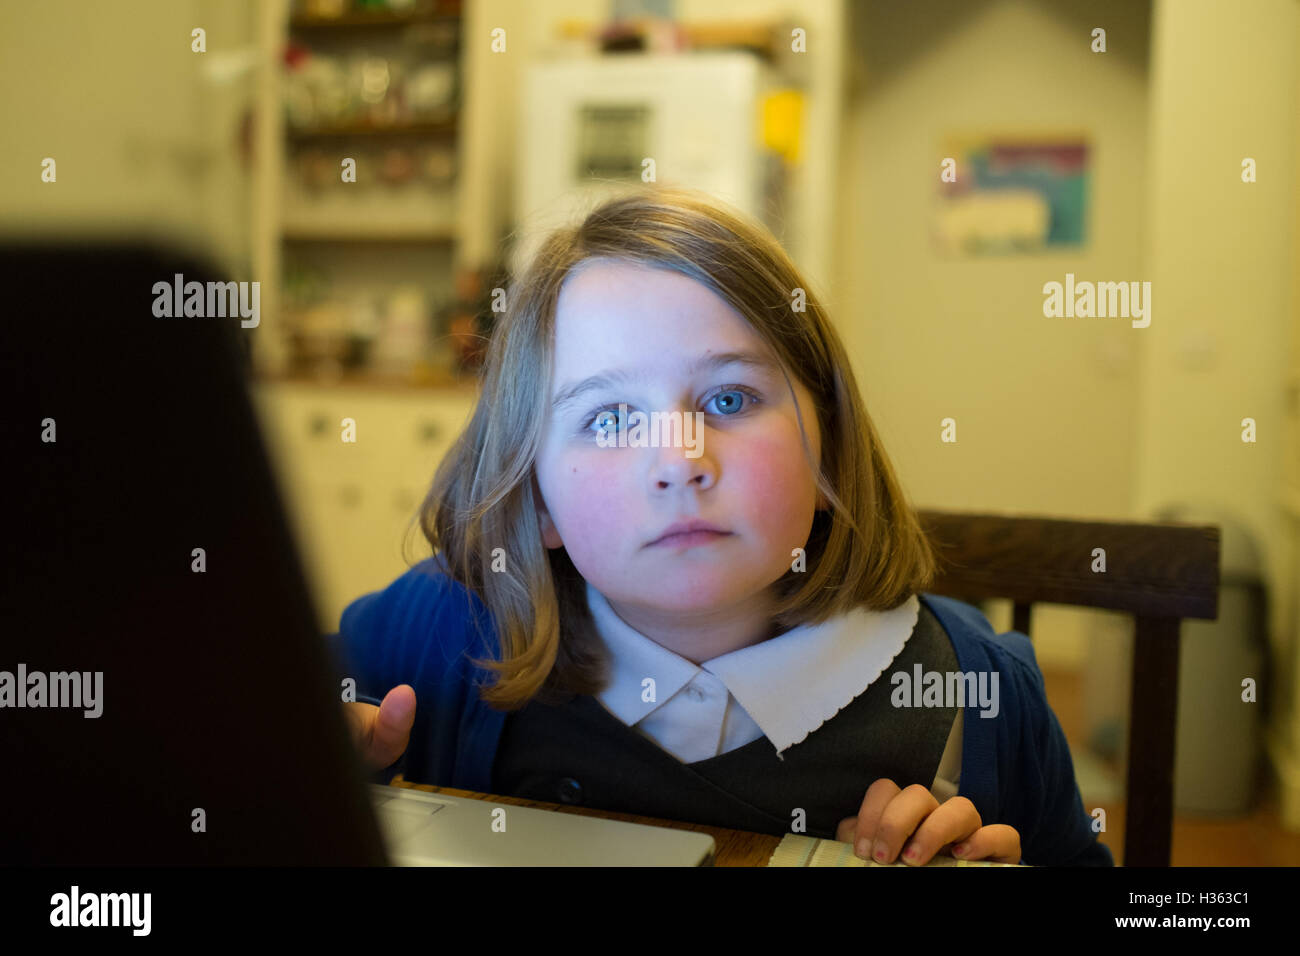 Little girl at computer looks thoughtfully out the picture Stock Photo